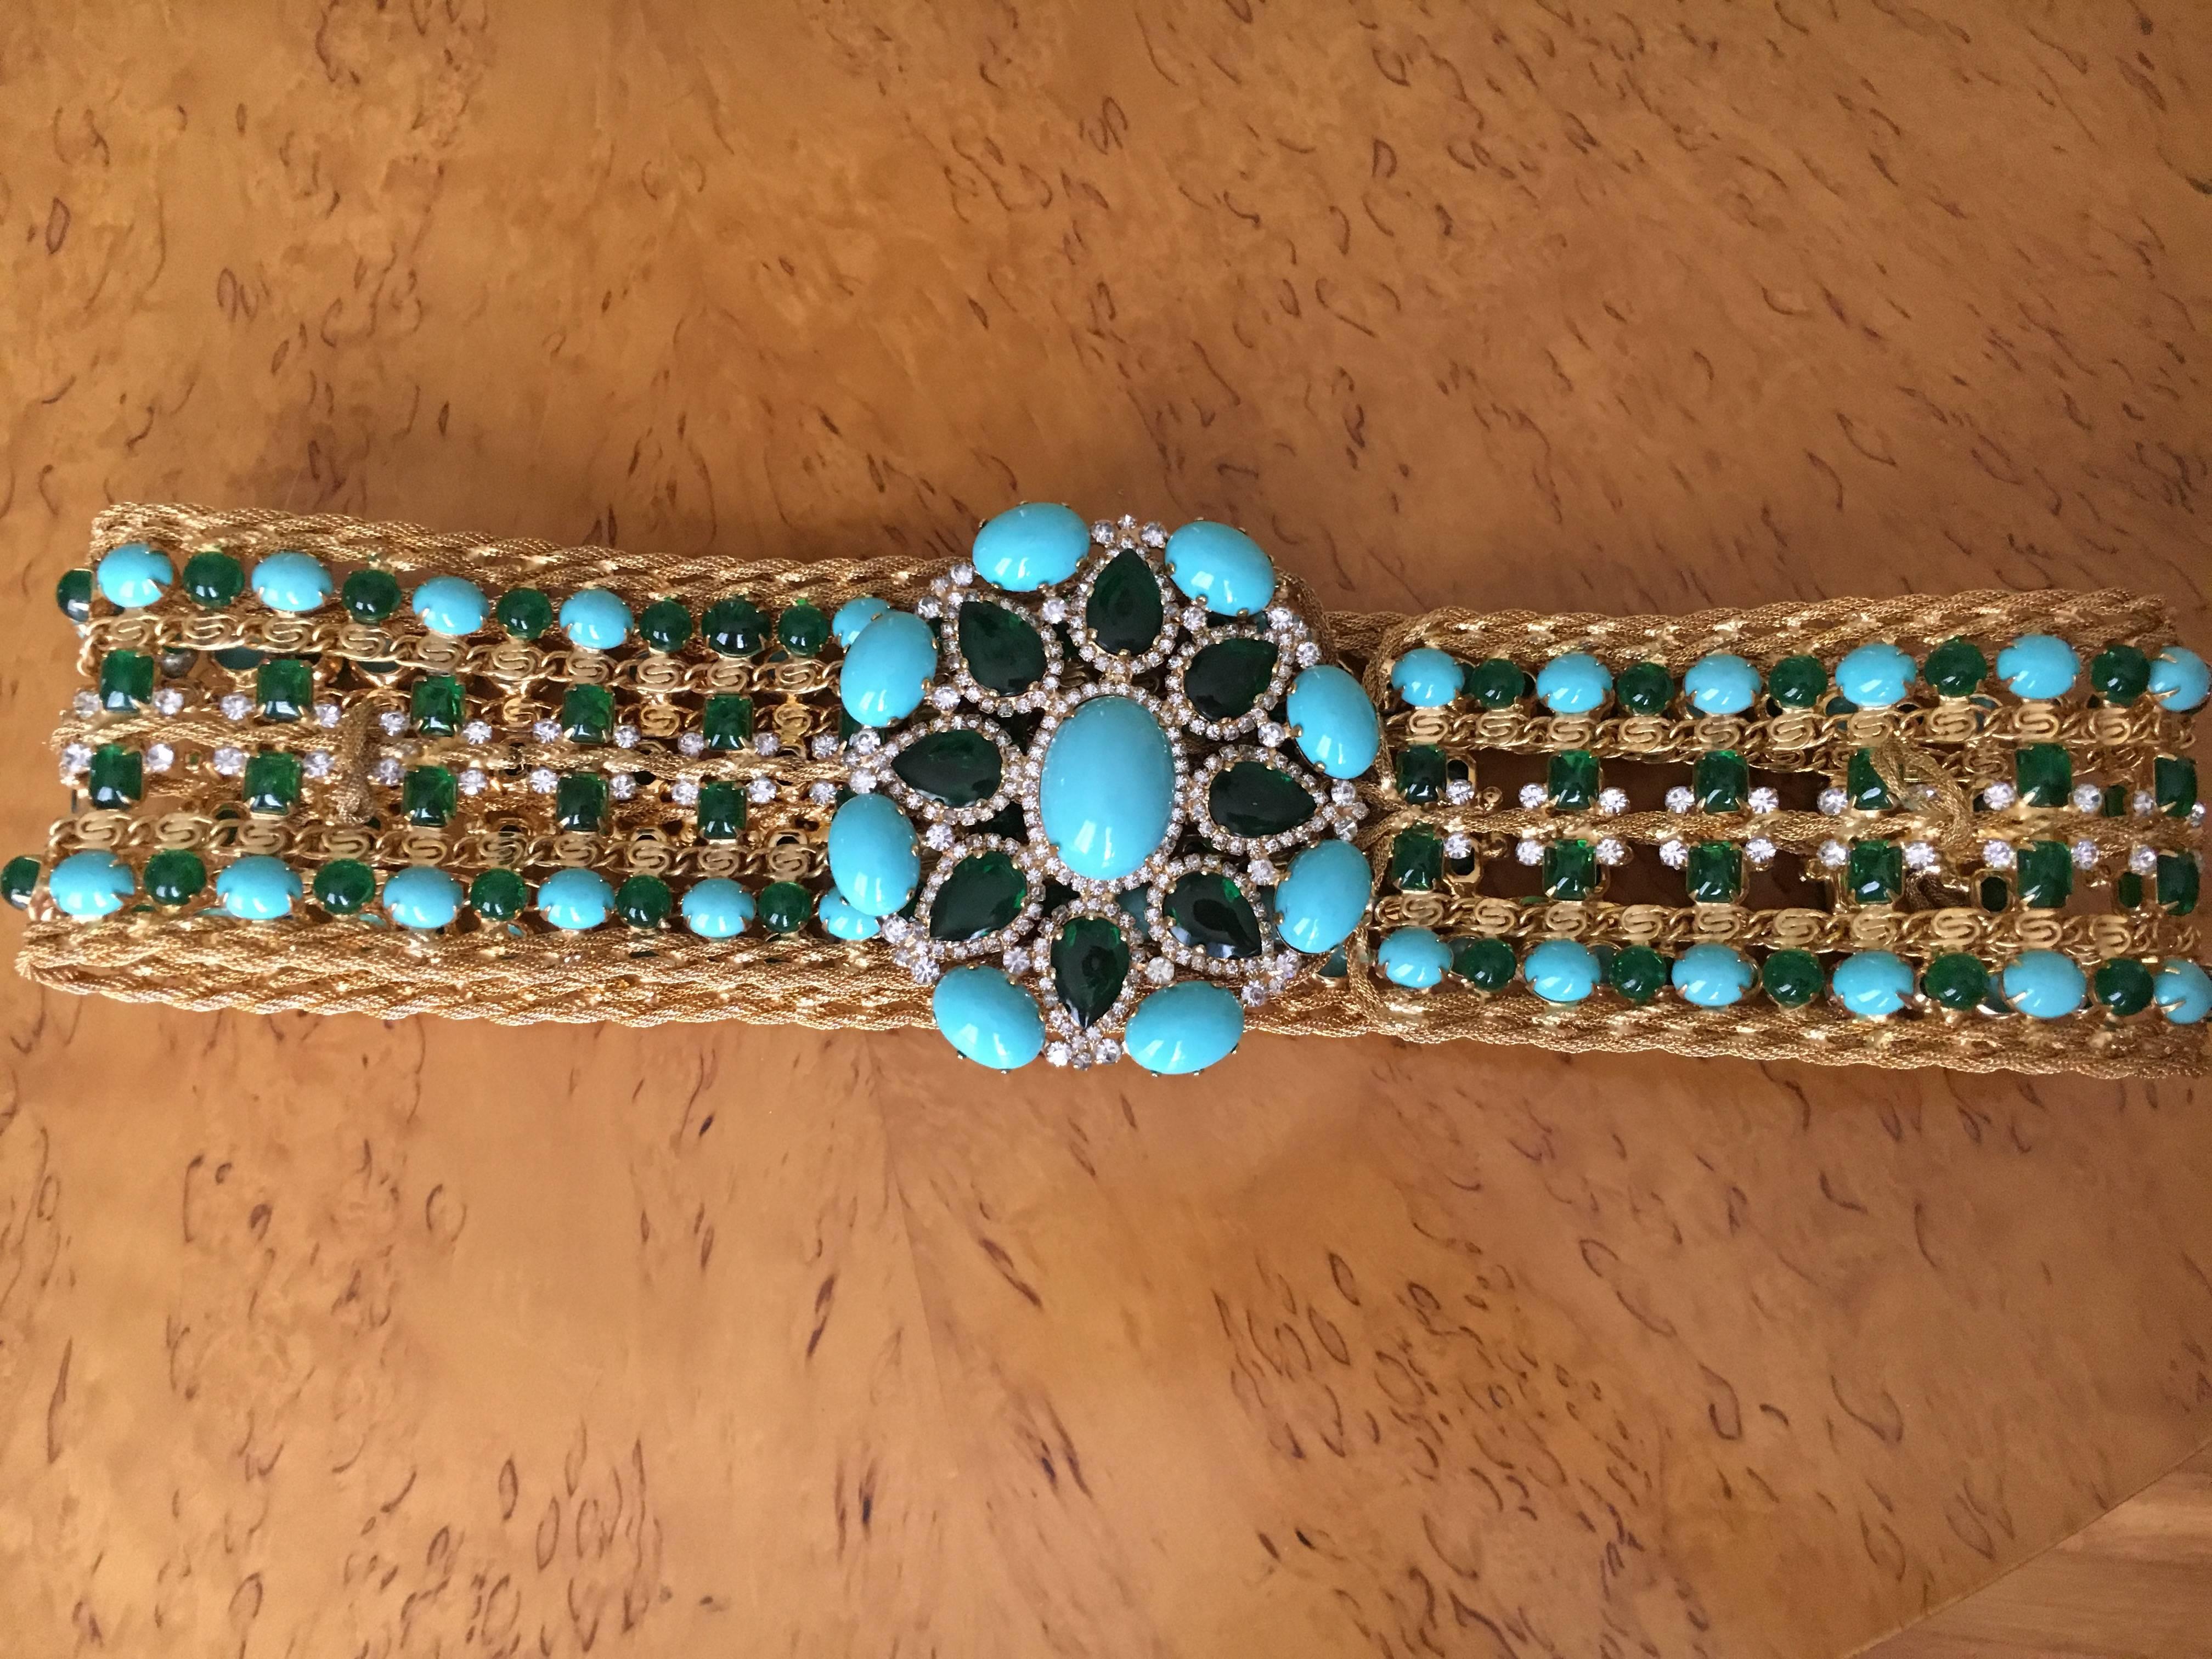 Kenneth Jay Lane Gobsmacking 1960's Faux Turquoise & Emerald Belt.
This is a sensational piece. 
I have rarely come across a KJL belt this wide.
The belt is 3" wide, and the buckle measures 4.5" x 3.5"
Excellent condition o